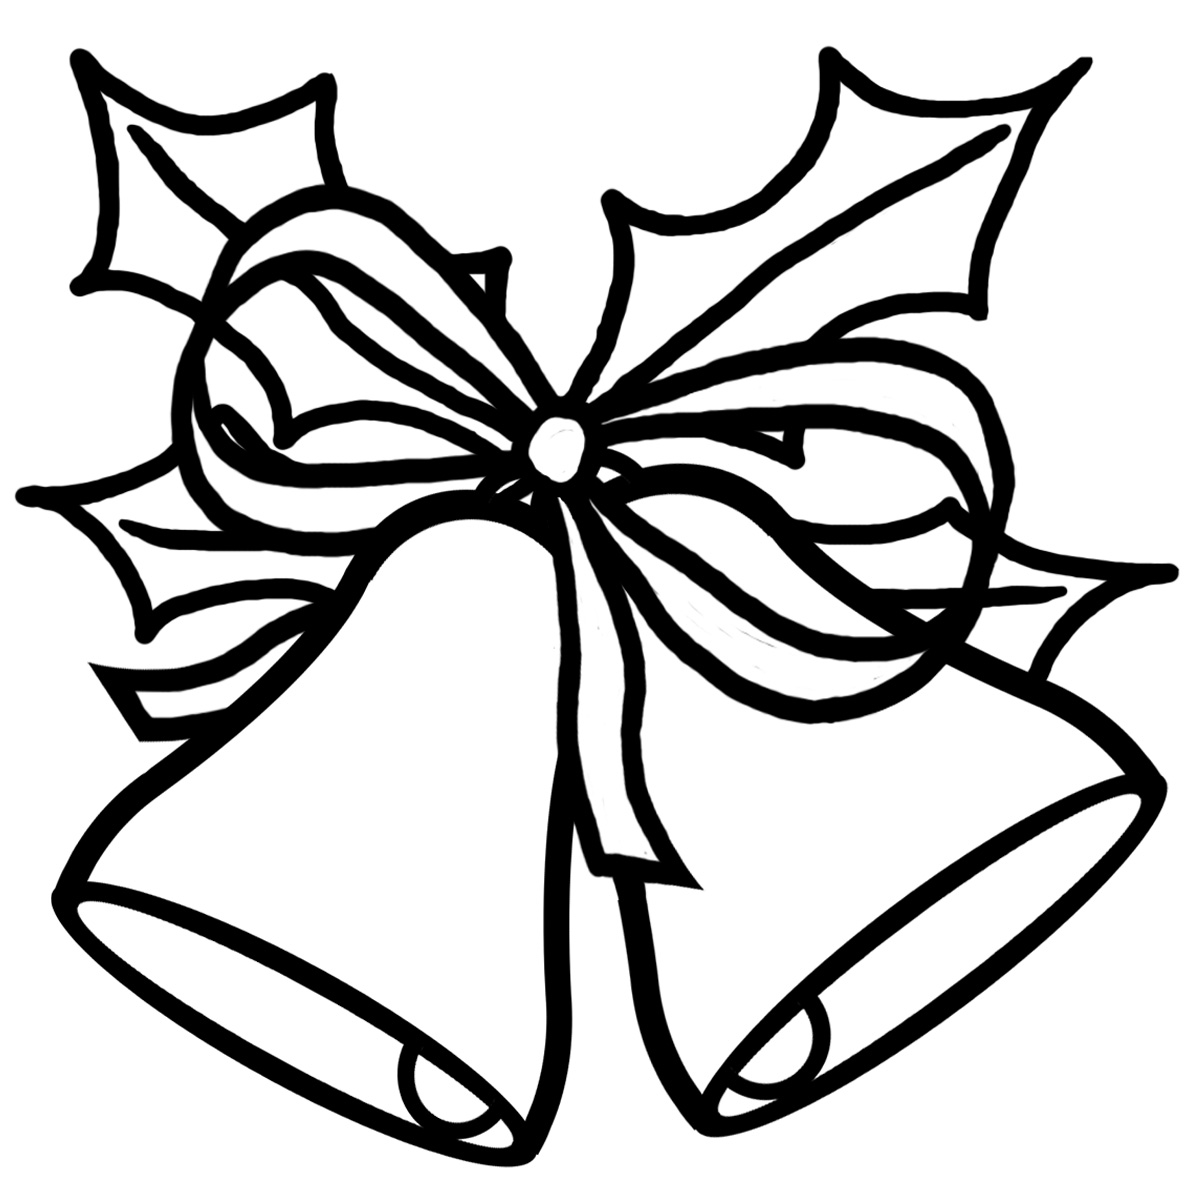 Happy Holidays Clip Art Black And White Hd Images 3 HD Wallpapers ...